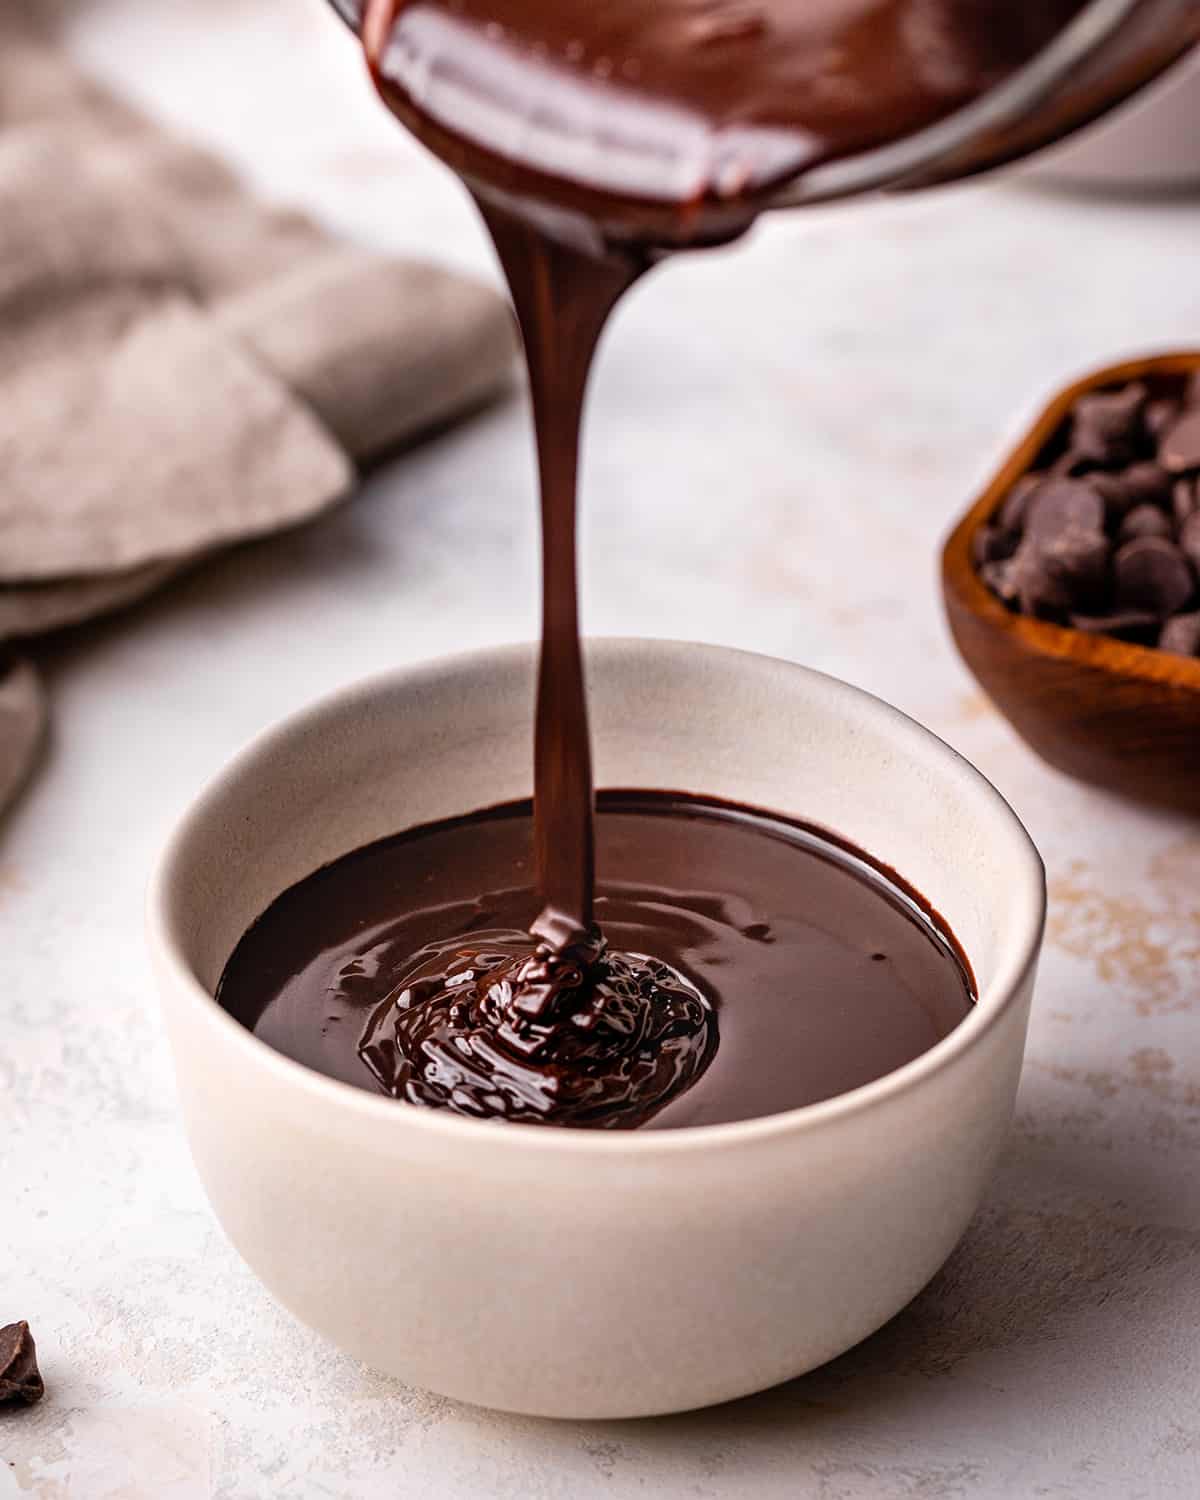 chocolate sauce being poured into a bowl